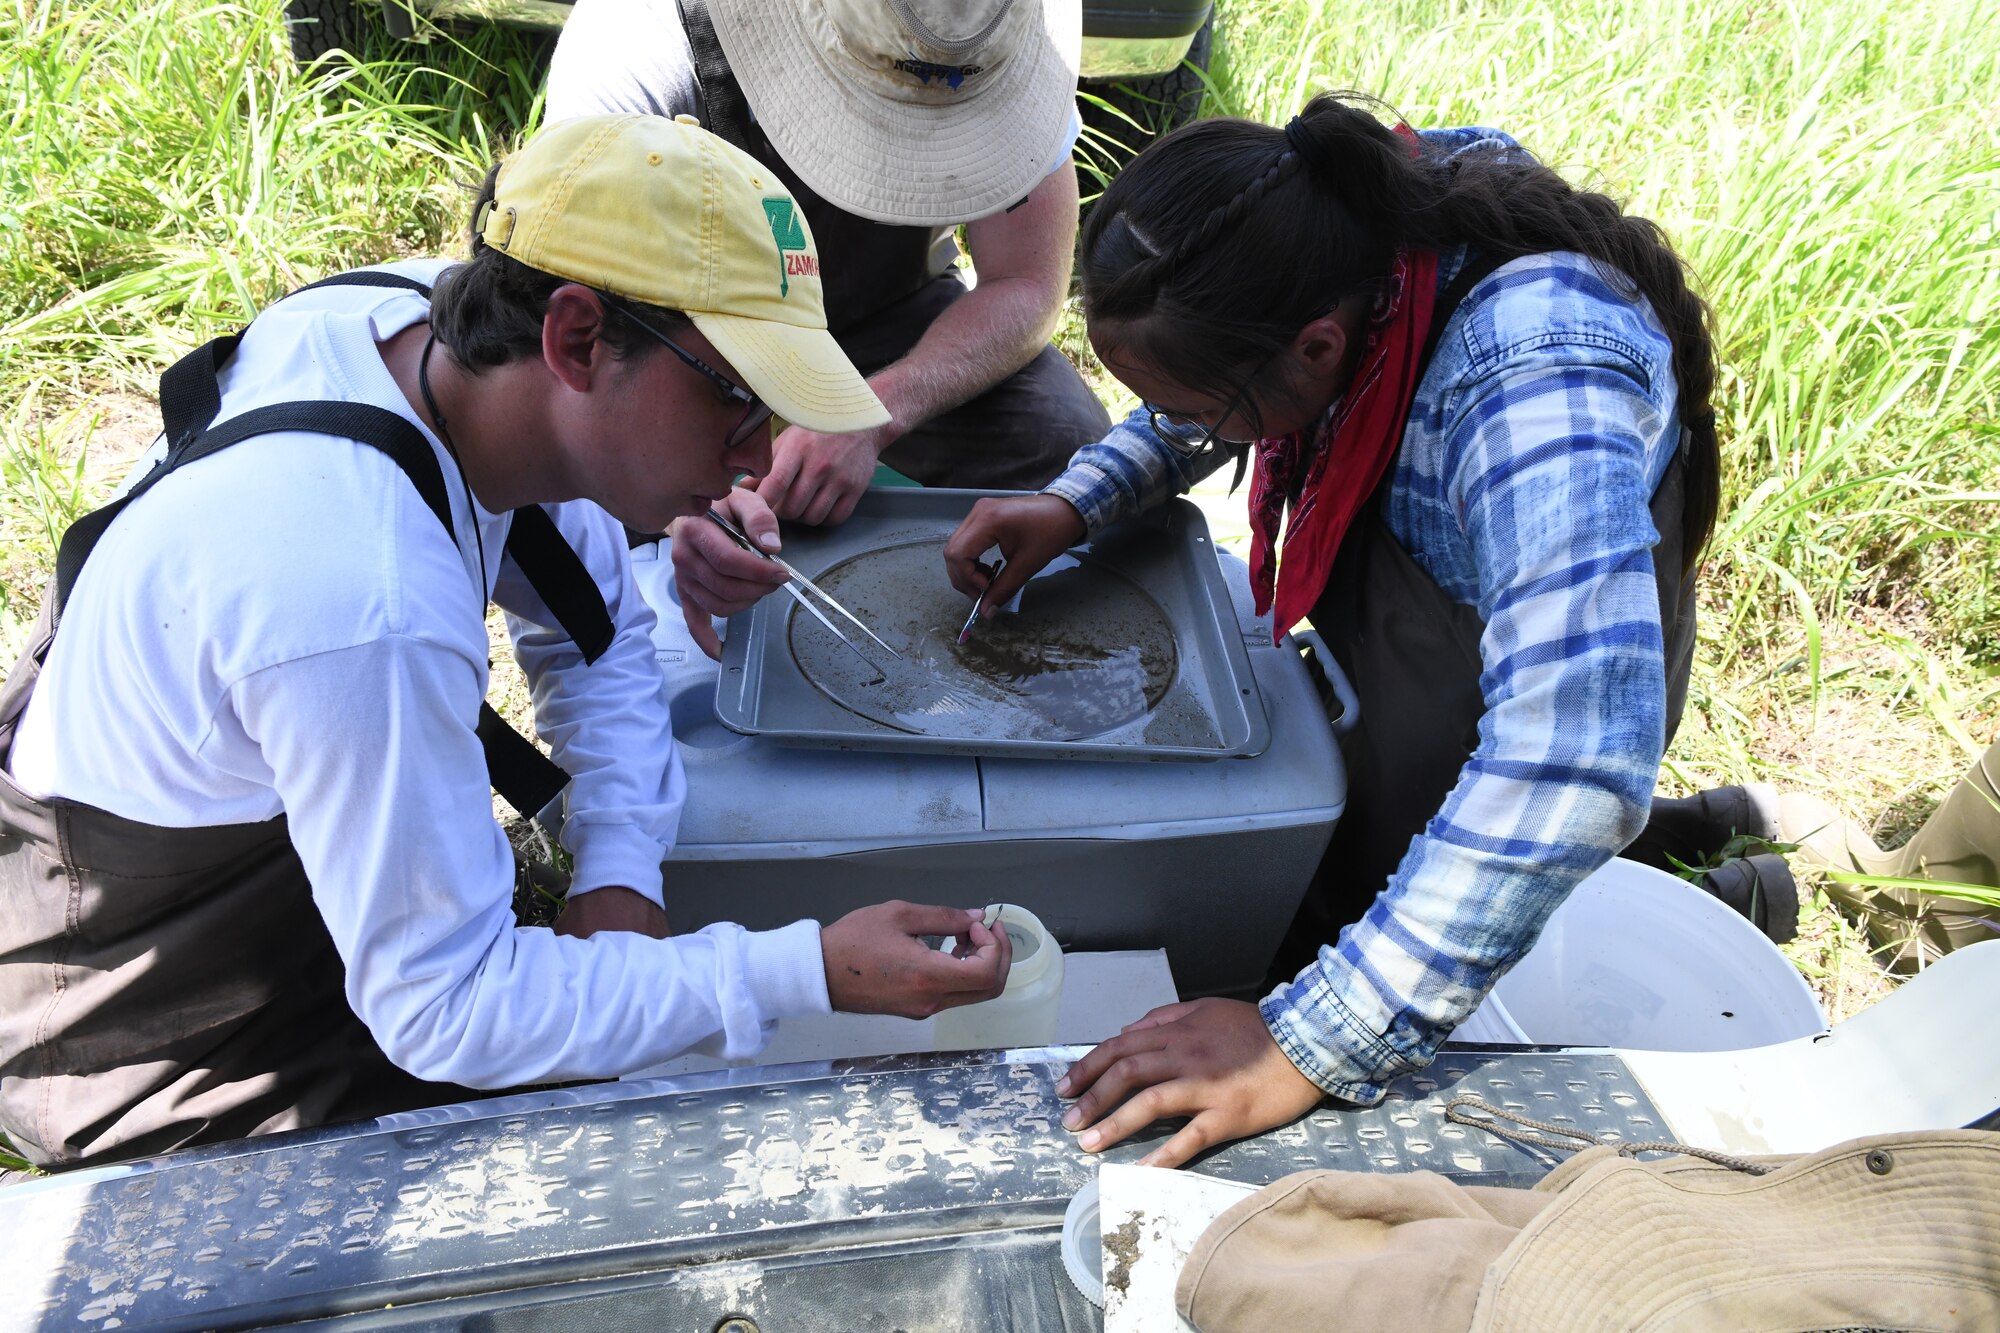 Kansas State University students Jorge Serrana (left), Josh Wurtz (center) and Daryline Dayzie painstakingly collect splinter-sized invertebrates from McConnell Creek on June 16, 2022, at McConnell Air Force Base, Kansas. The collection assessed the health of the river's aquatic population base before the KSU team began modifications to the creek's shoreline as part of their erosion control study. The McConnell portion of this KSU study is part of a partnership between KSU, the U.S. Fish and Wildlife Service, and McConnell Air Force Base. (U.S. Air Force photo by John Van Winkle)